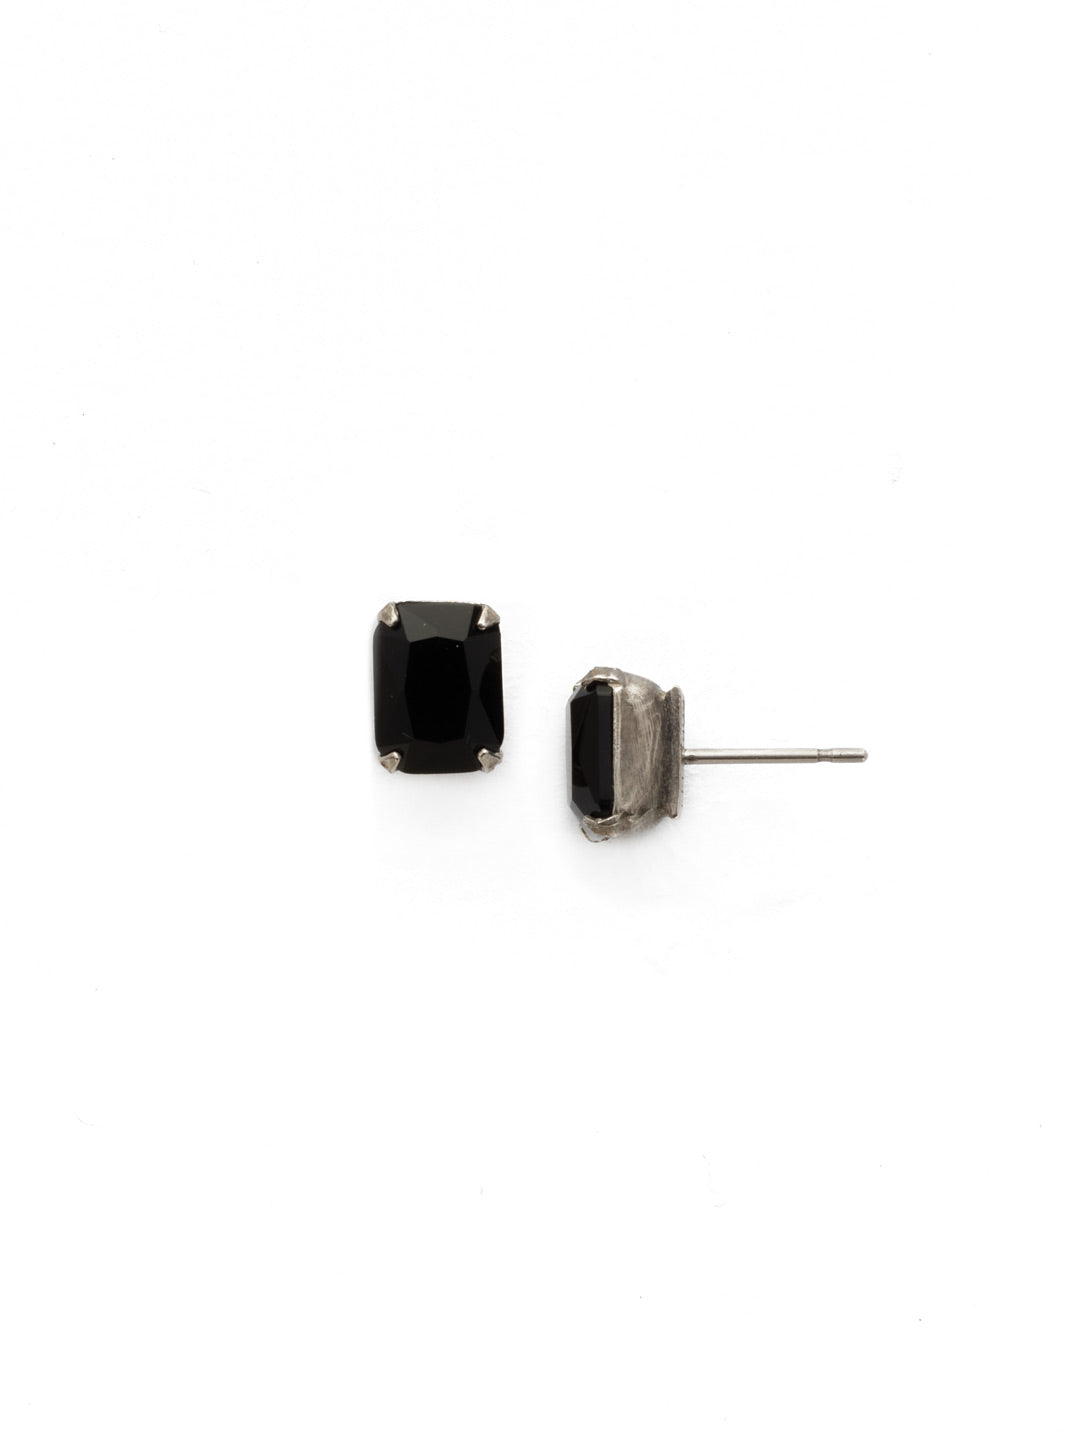 Mini Emerald Cut Stud Earrings - EBY42ASBON - Simply sophisticated. The mini emerald cut stud earrings can be worn alone or paired with anything for an extra accent to any wardrobe. From Sorrelli's Black Onyx collection in our Antique Silver-tone finish.